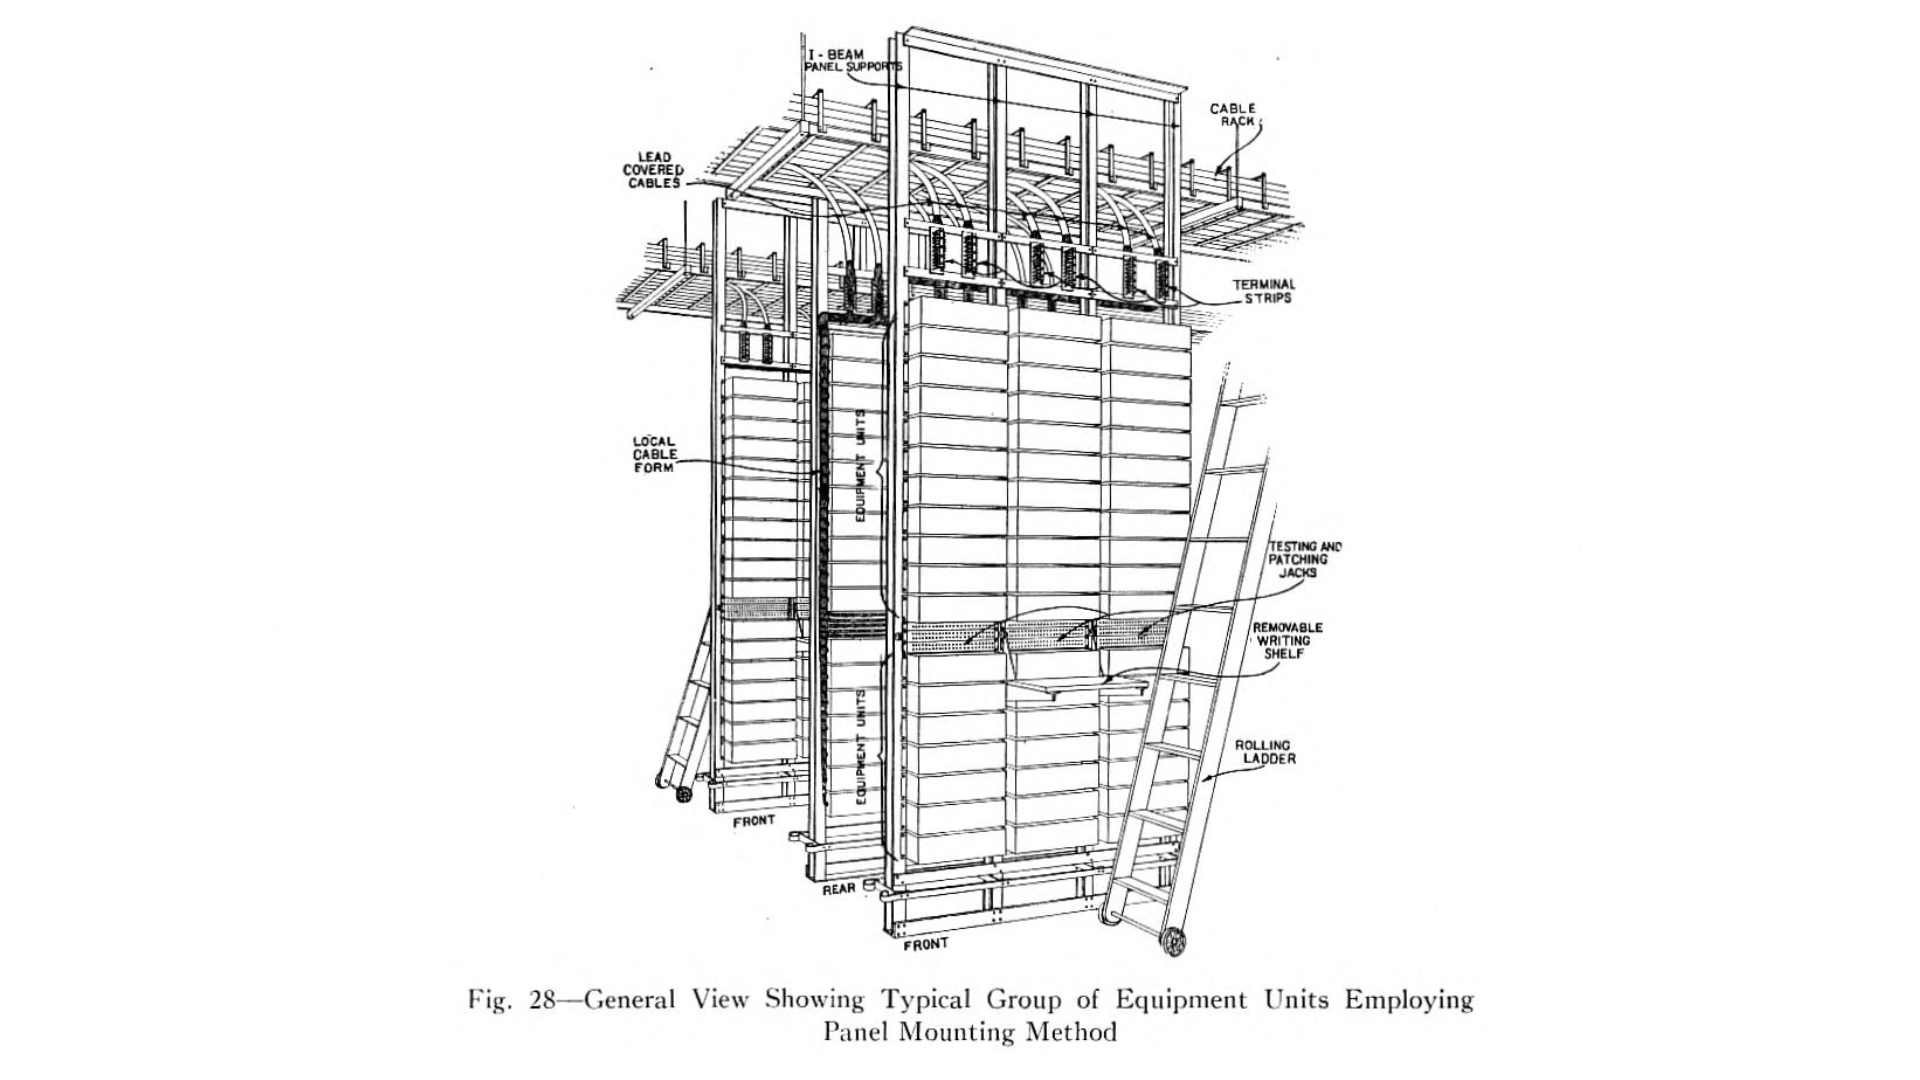 Bell System Technical Journal, 2: 3. July 1923, p.138.